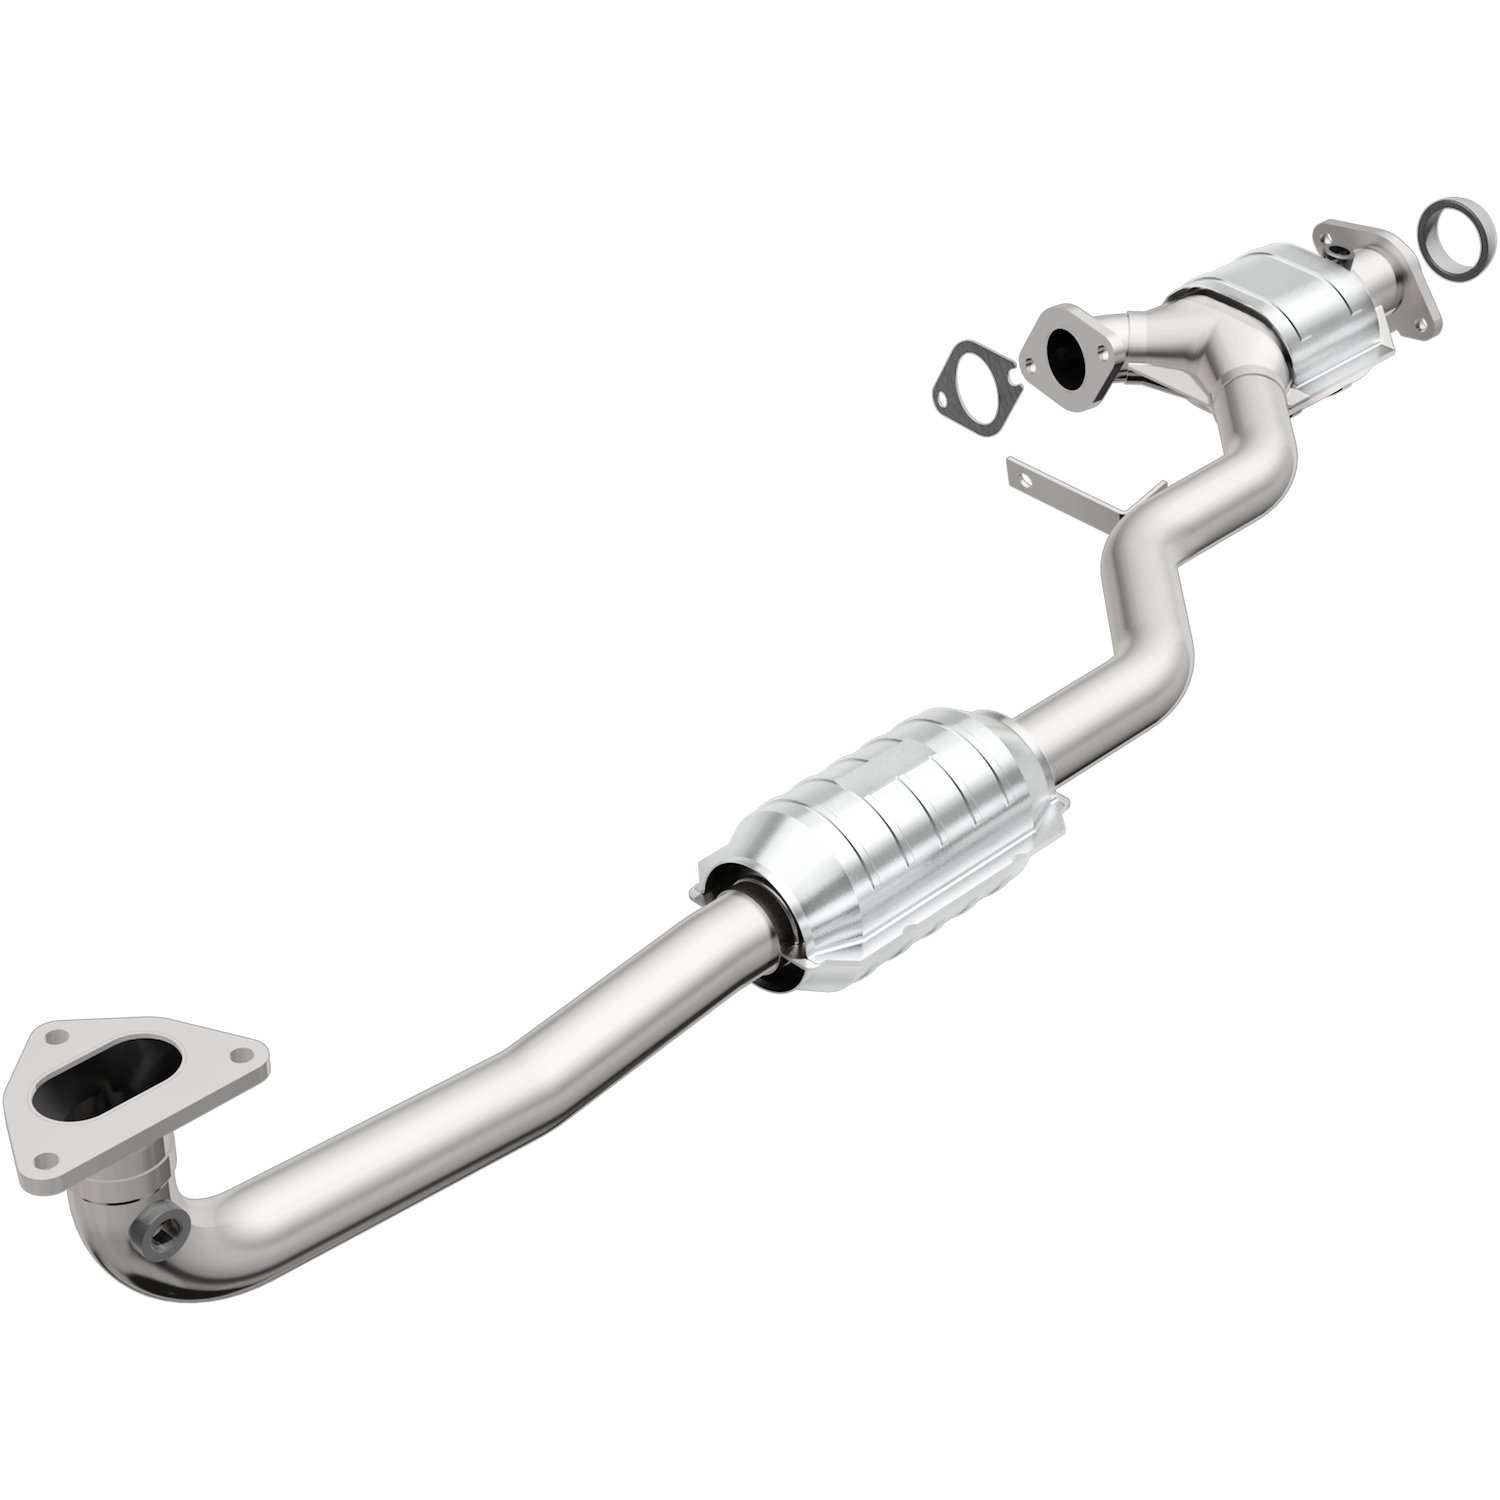 2001-2004 Subaru Outback OEM Grade Federal / EPA Compliant Direct-Fit Catalytic Converter